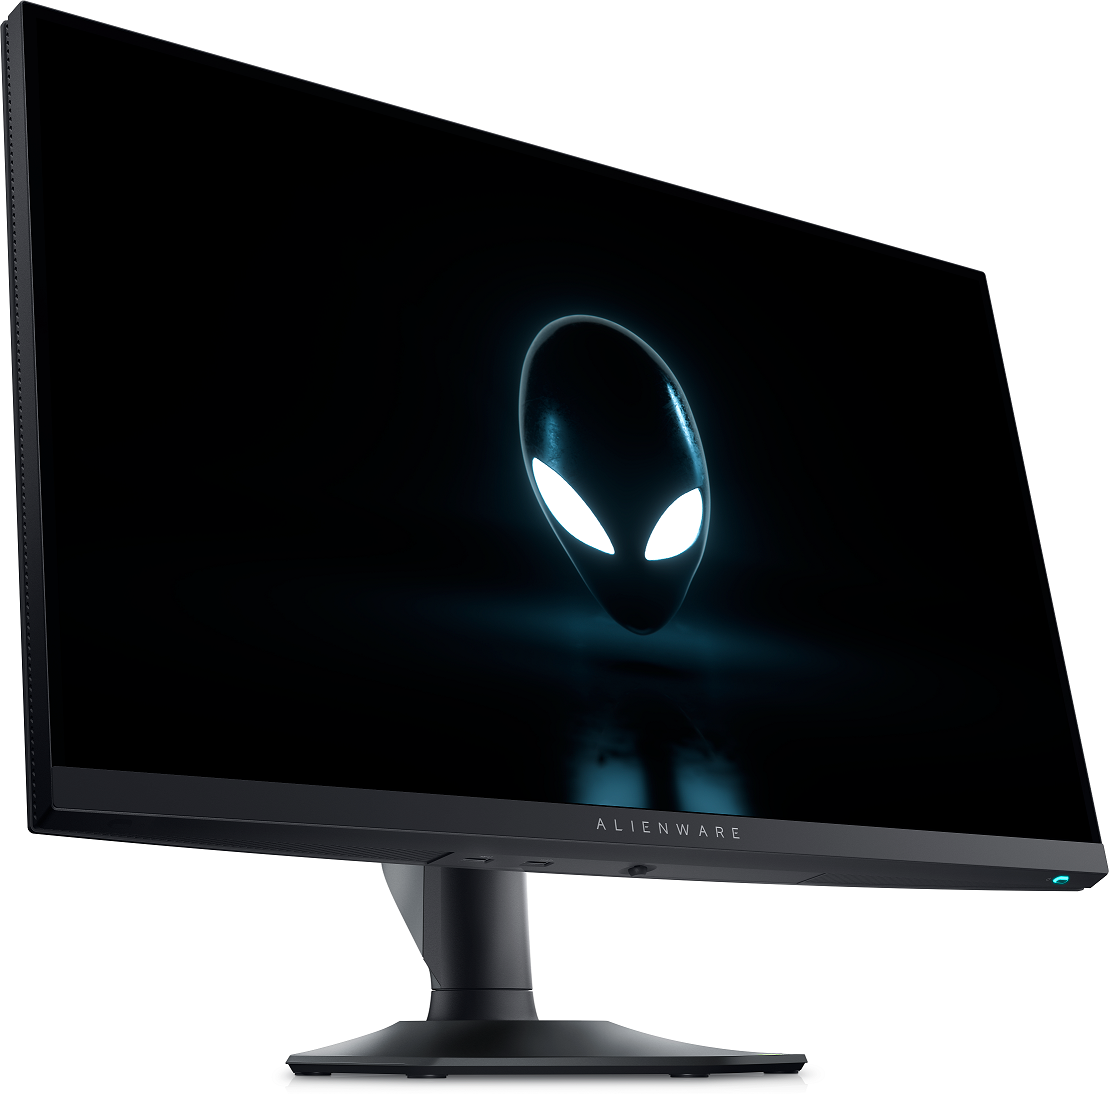 New Alienware and Dell Gaming Monitors Will be Available for Purchase